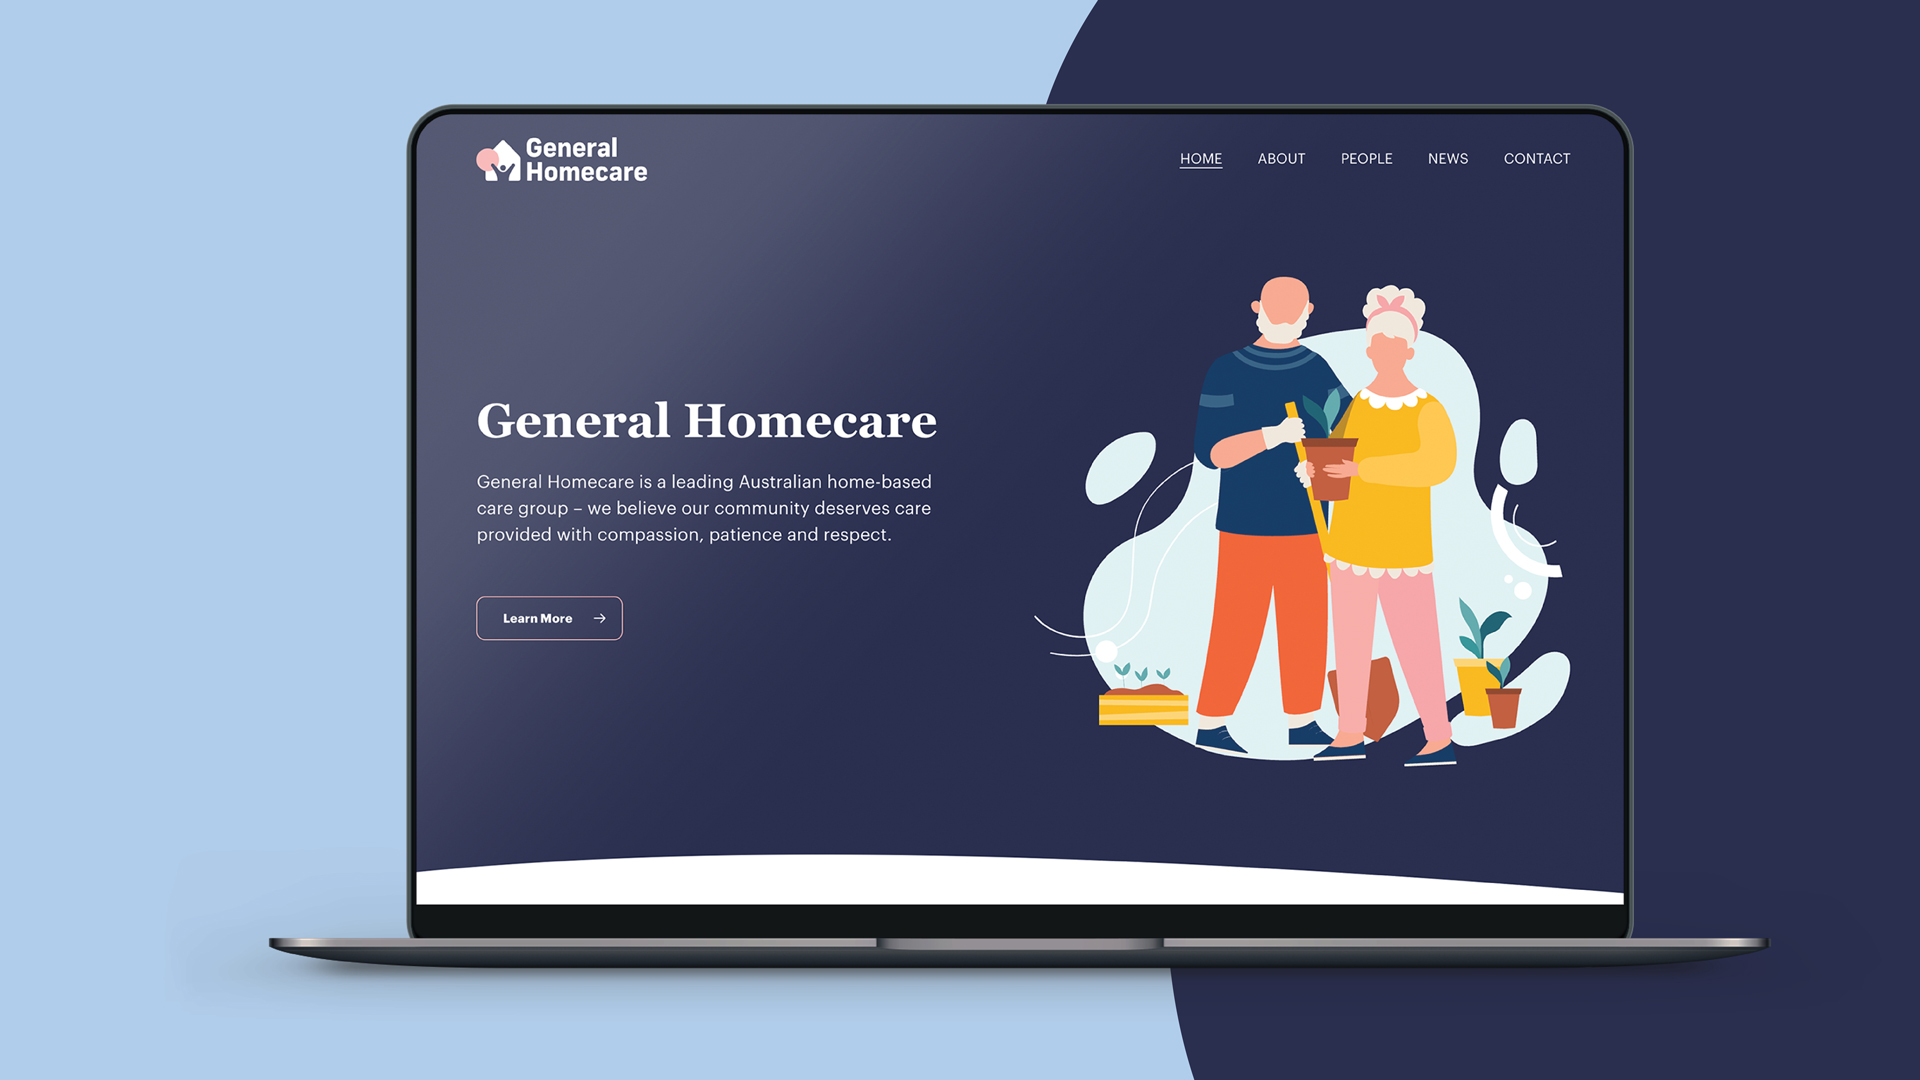 Marketing and Design Agency - Poloko - Northern Beaches - General Homecare